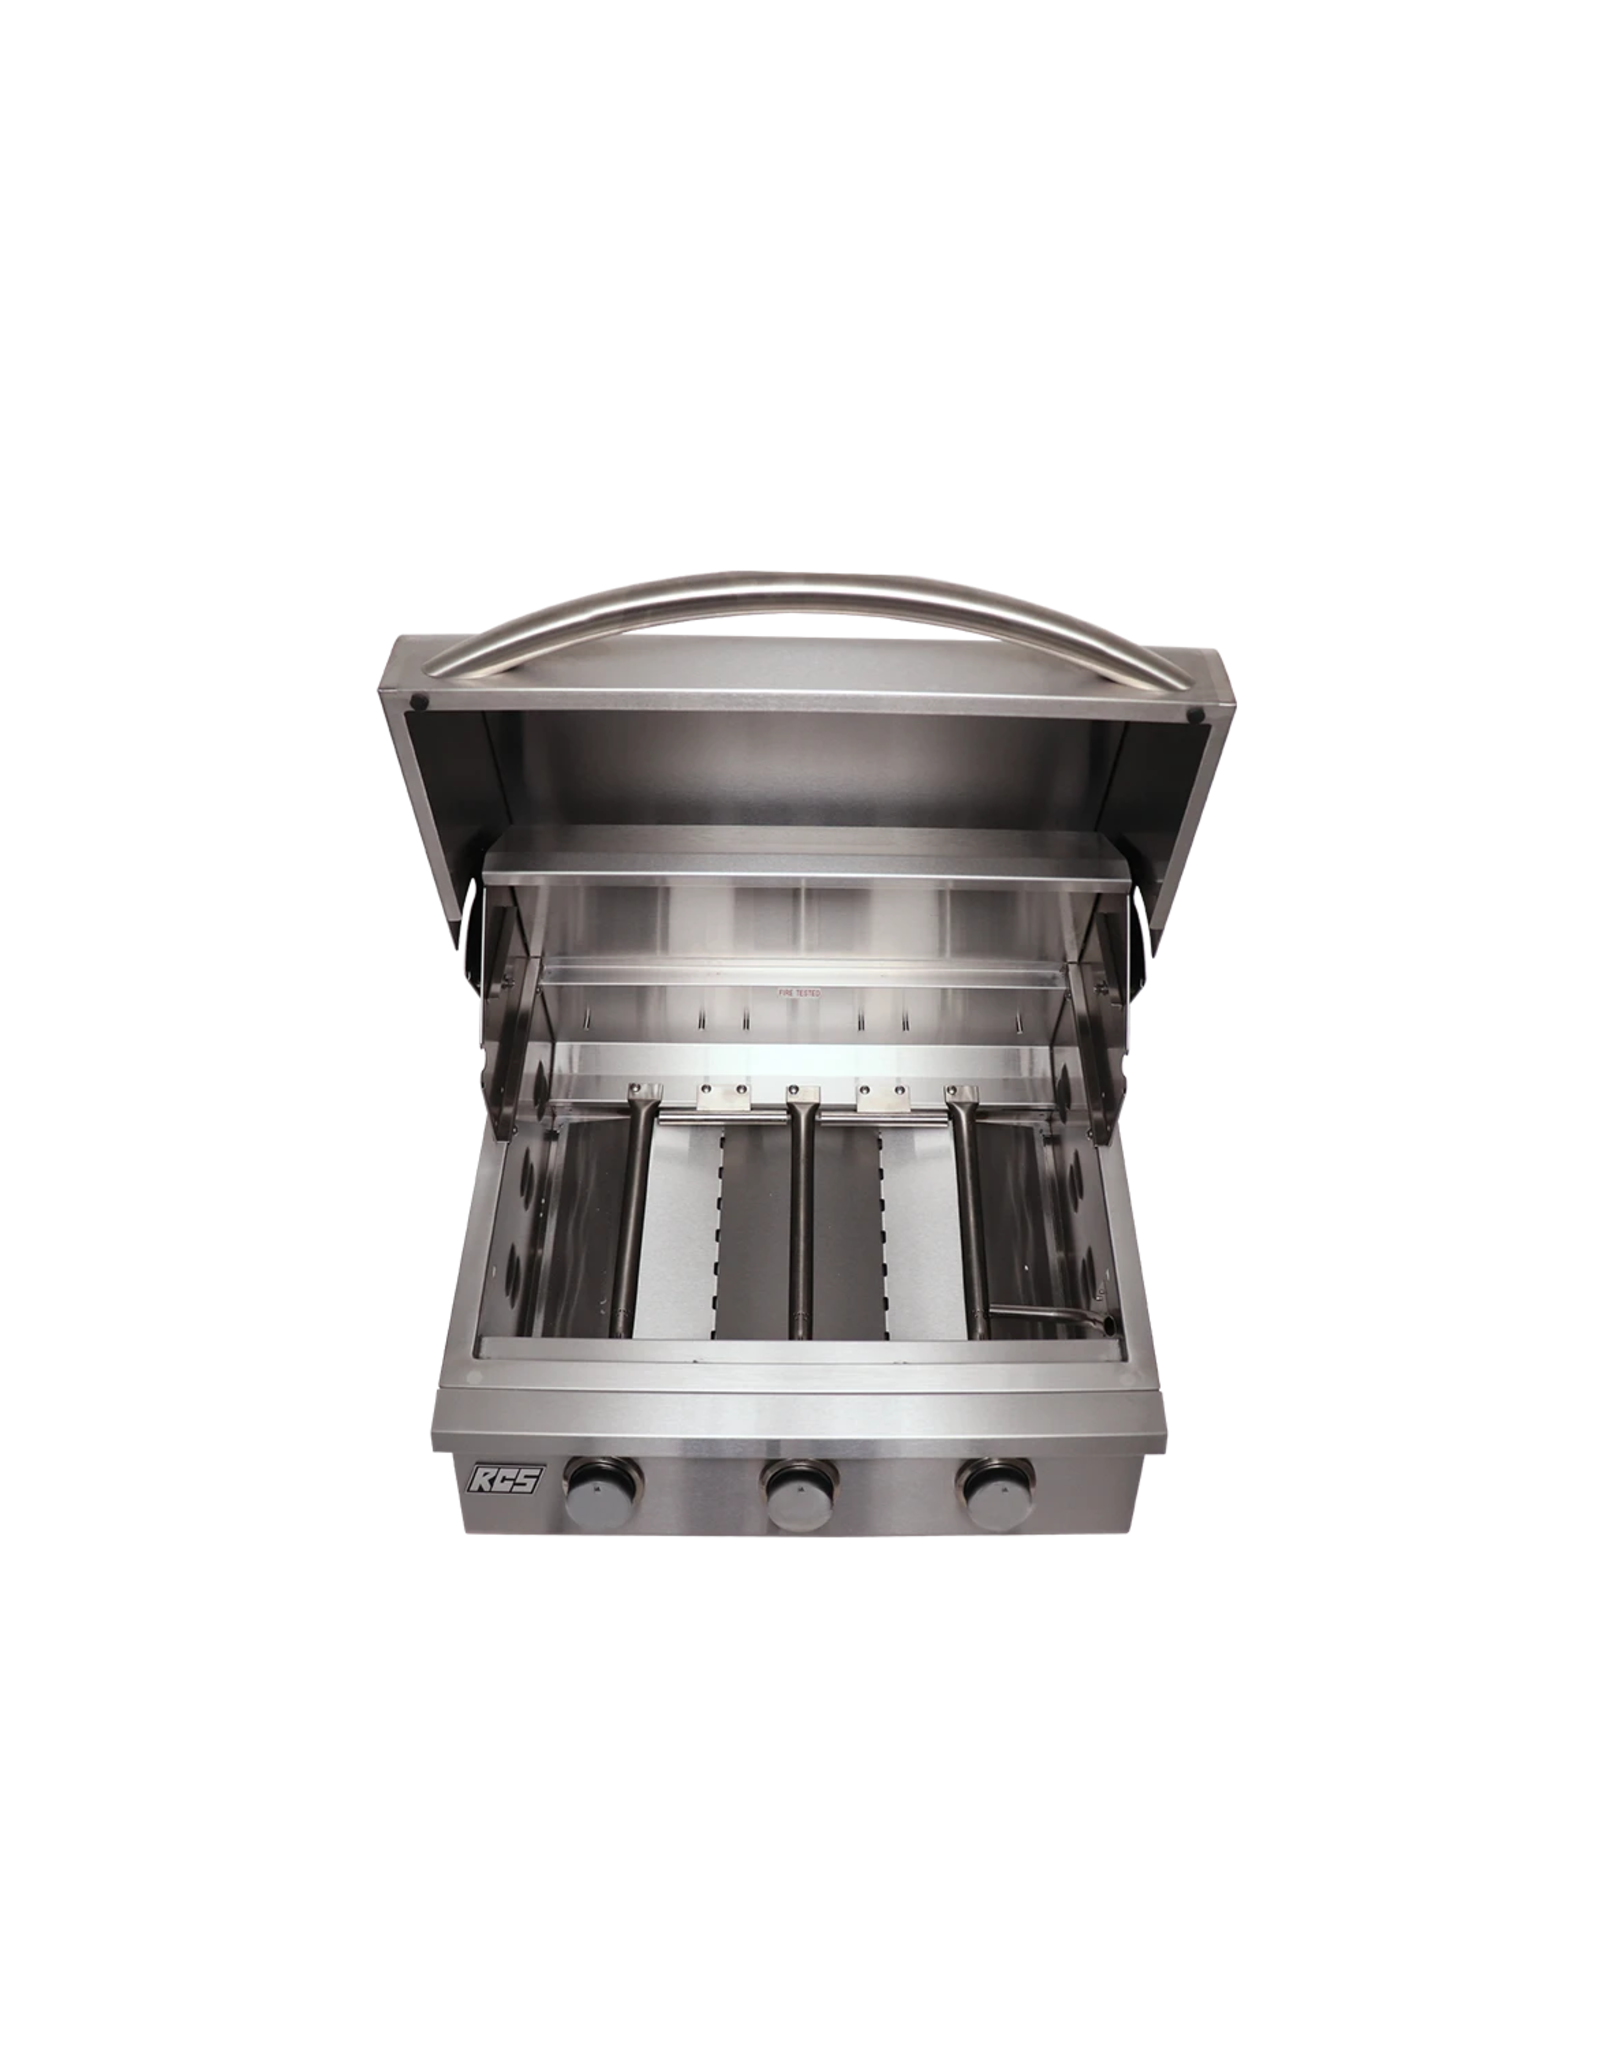 Renaissance Cooking Systems Renaissance Cooking Systems 26" Premier Drop-In Grill - RJC26A